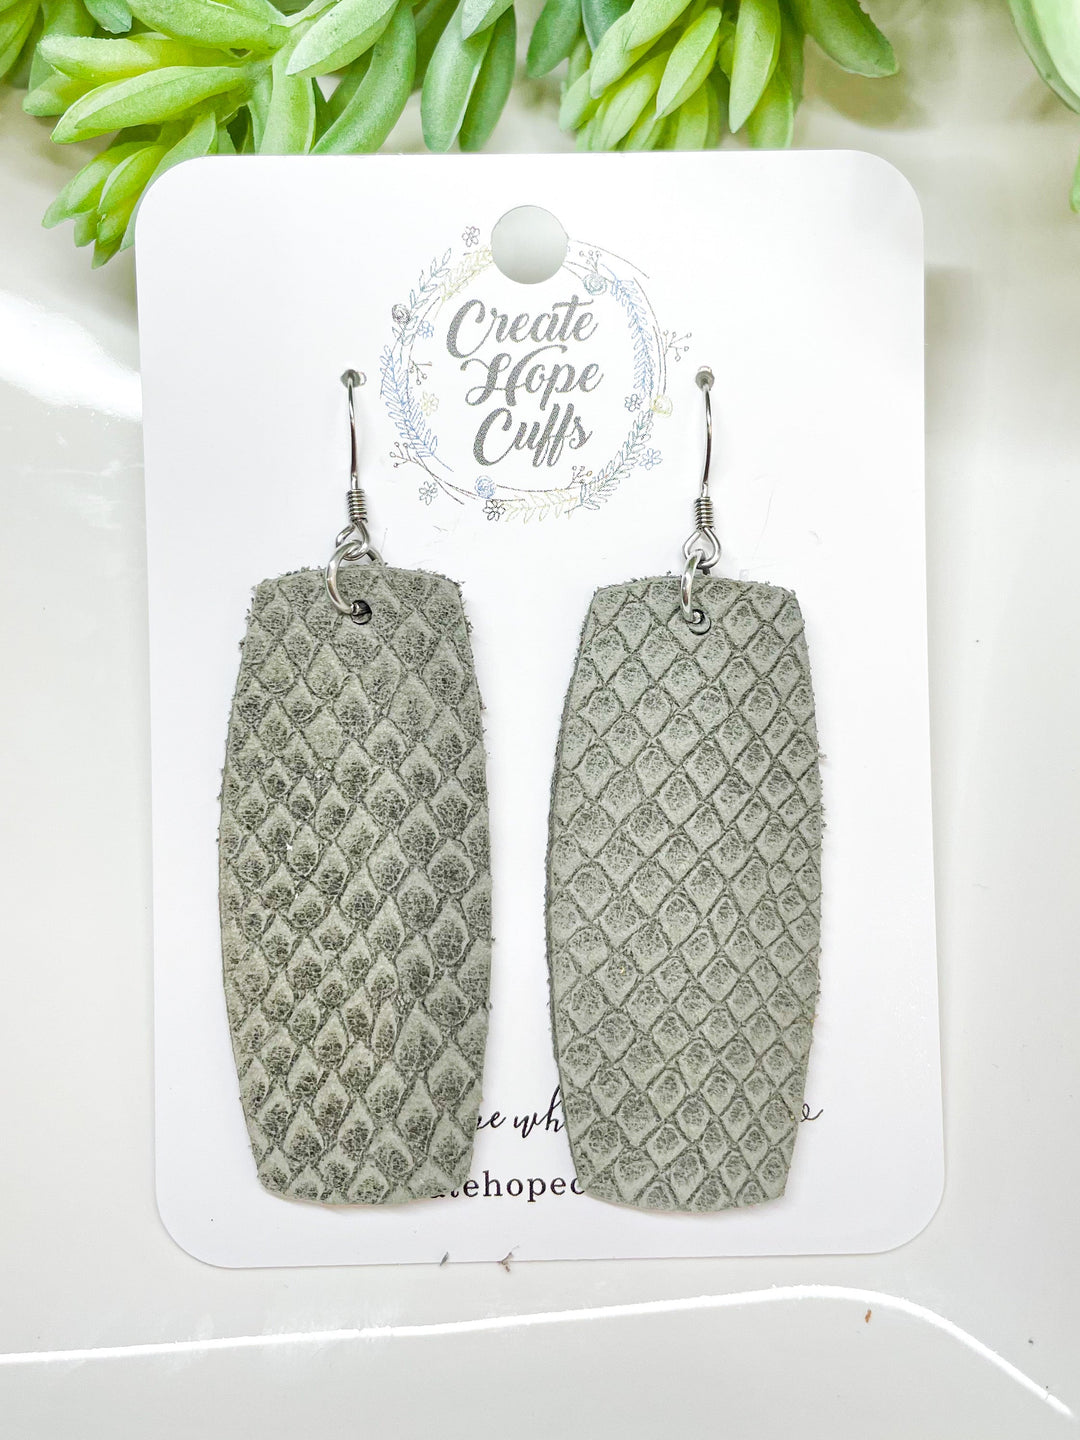 Textured Grey Suede Leather Earrings | Stacked | Hypoallergenic | Women Leather Earrings Create Hope Cuffs Long Bar 